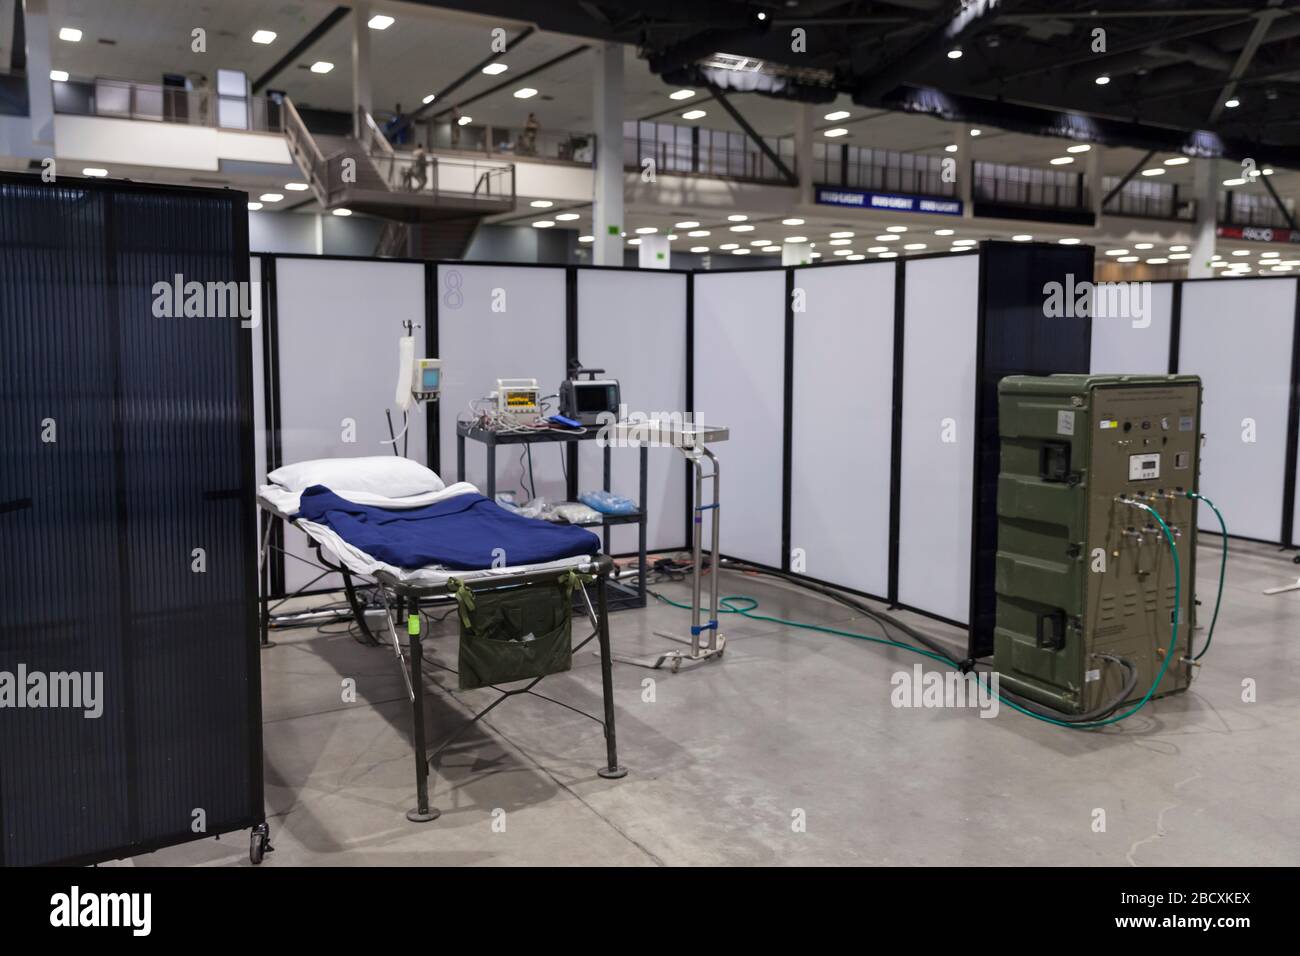 An intensive care unit is ready to recieve patients at the field hospital in CenturyLink Field Event Center in Seattle on April 5, 2020. The mobile army surgical hospital, currently for non-COVID-19 cases, involves military medical personnel from multiple units, including the Soldiers from the 627th Hospital Center's 10th Field Hospital at Fort Carson, Colorado, the 62nd Medical Brigade from Joint Base Lewis-McChord, Washington and others. Officials said that he hospital is now ready to accept patients. Stock Photo